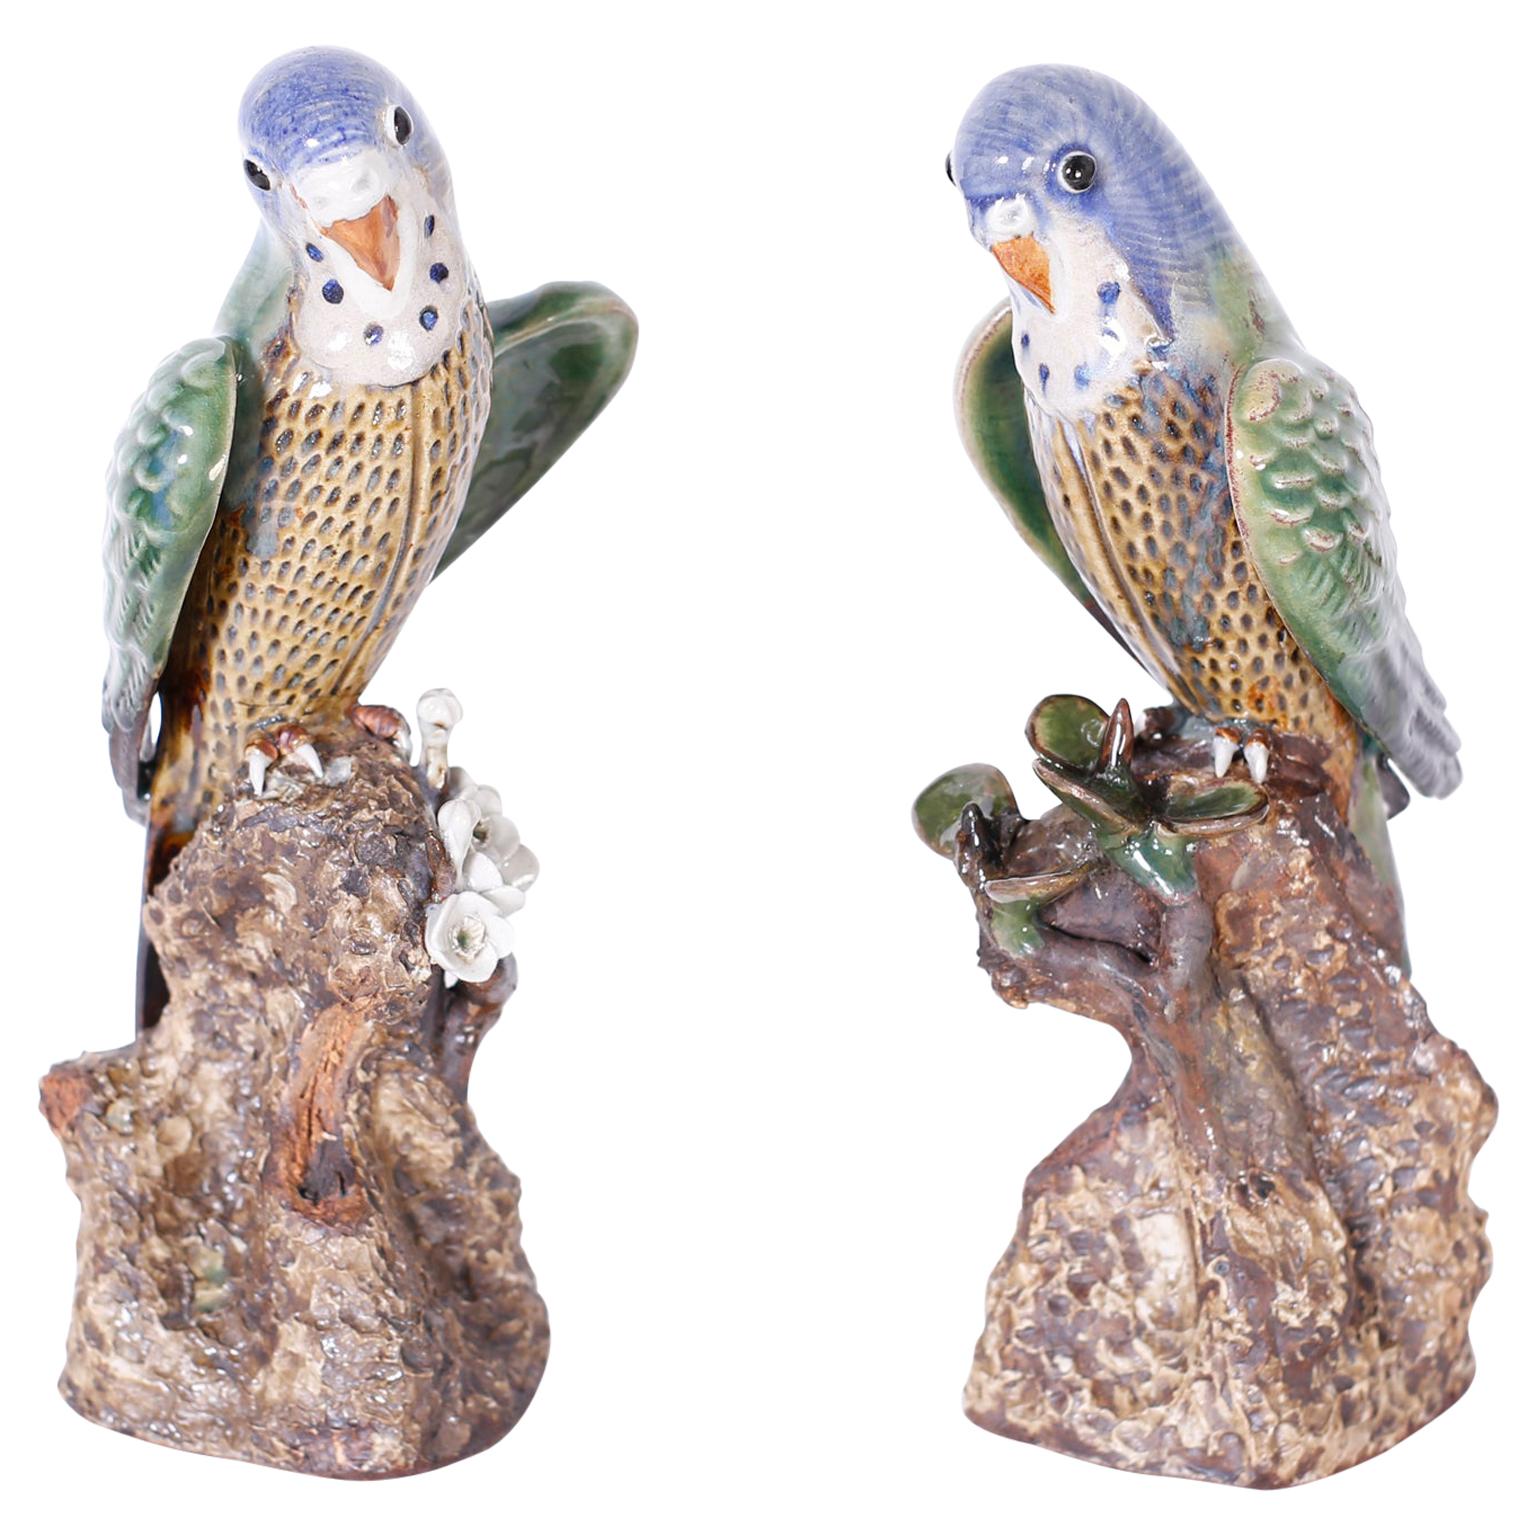 Pair of Chinese Glazed Terra Cotta Birds or Parakeets